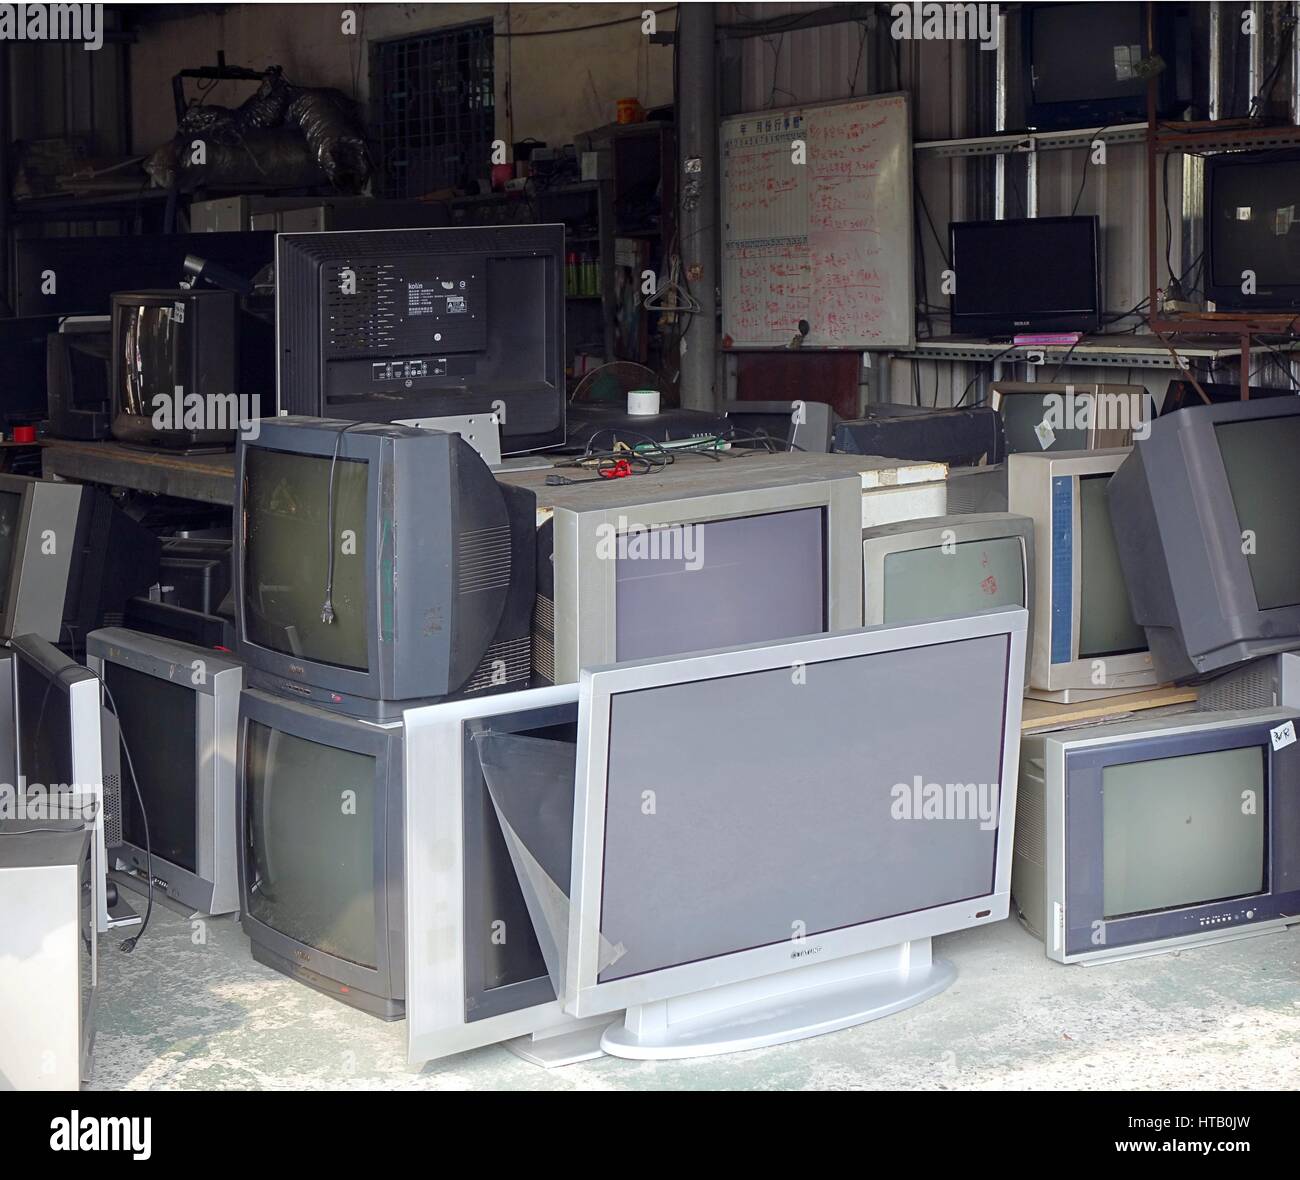 KAOHSIUNG, TAIWAN -- OCTOBER 17, 2015: A local store for the repair and recycling of traditional and flat screen televisions. Stock Photo